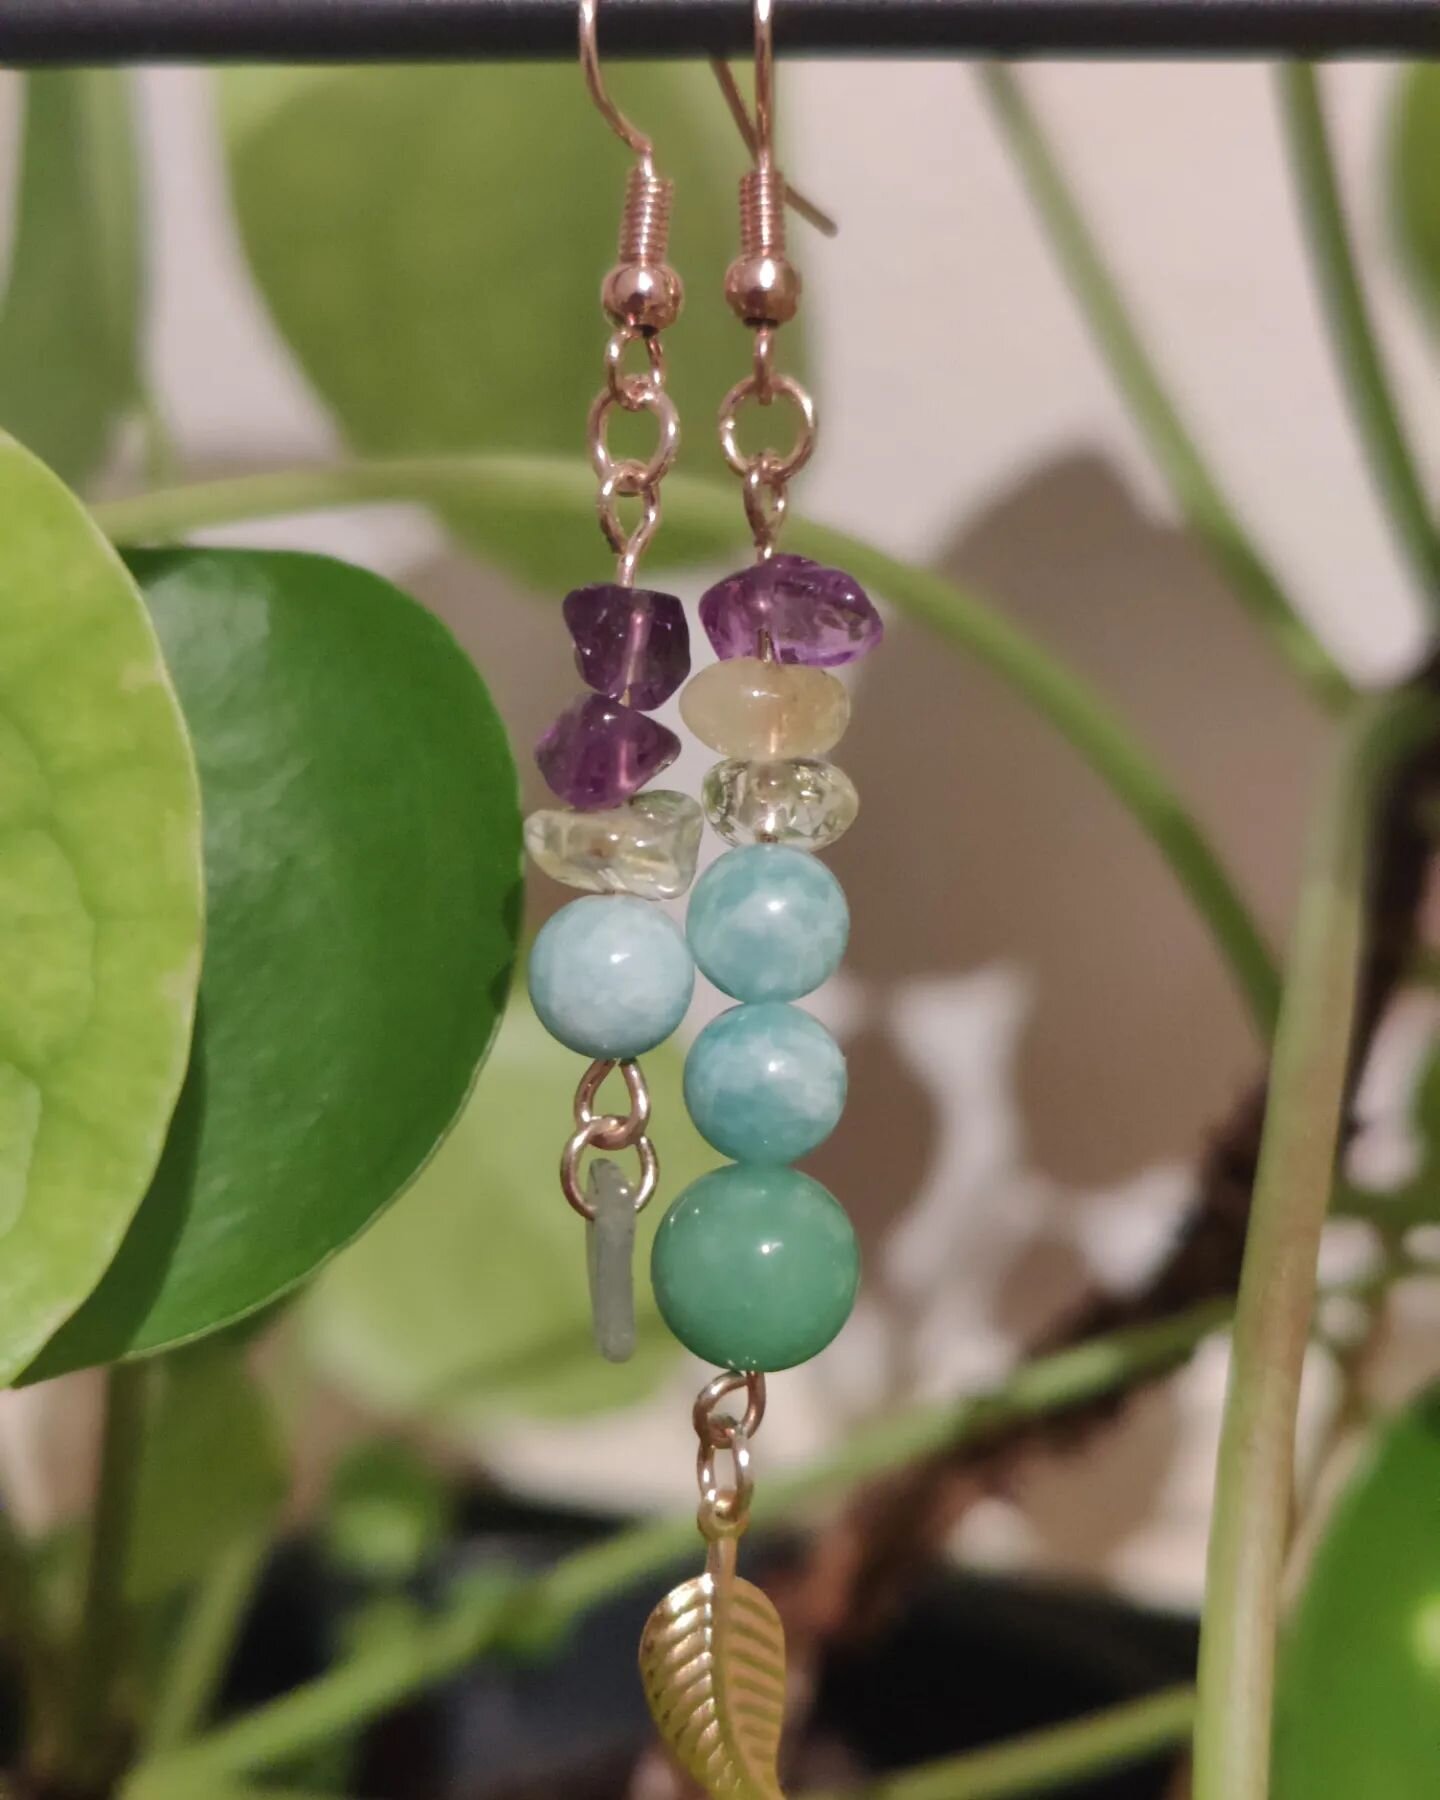 How about challenging ourselves to look at life from different perspectives? 

These asymmetrical earrings remind you to embrace differences and question status quo.

They include amethist, citrine, aventurine and amazonite.

Happy birthday @iriskuik